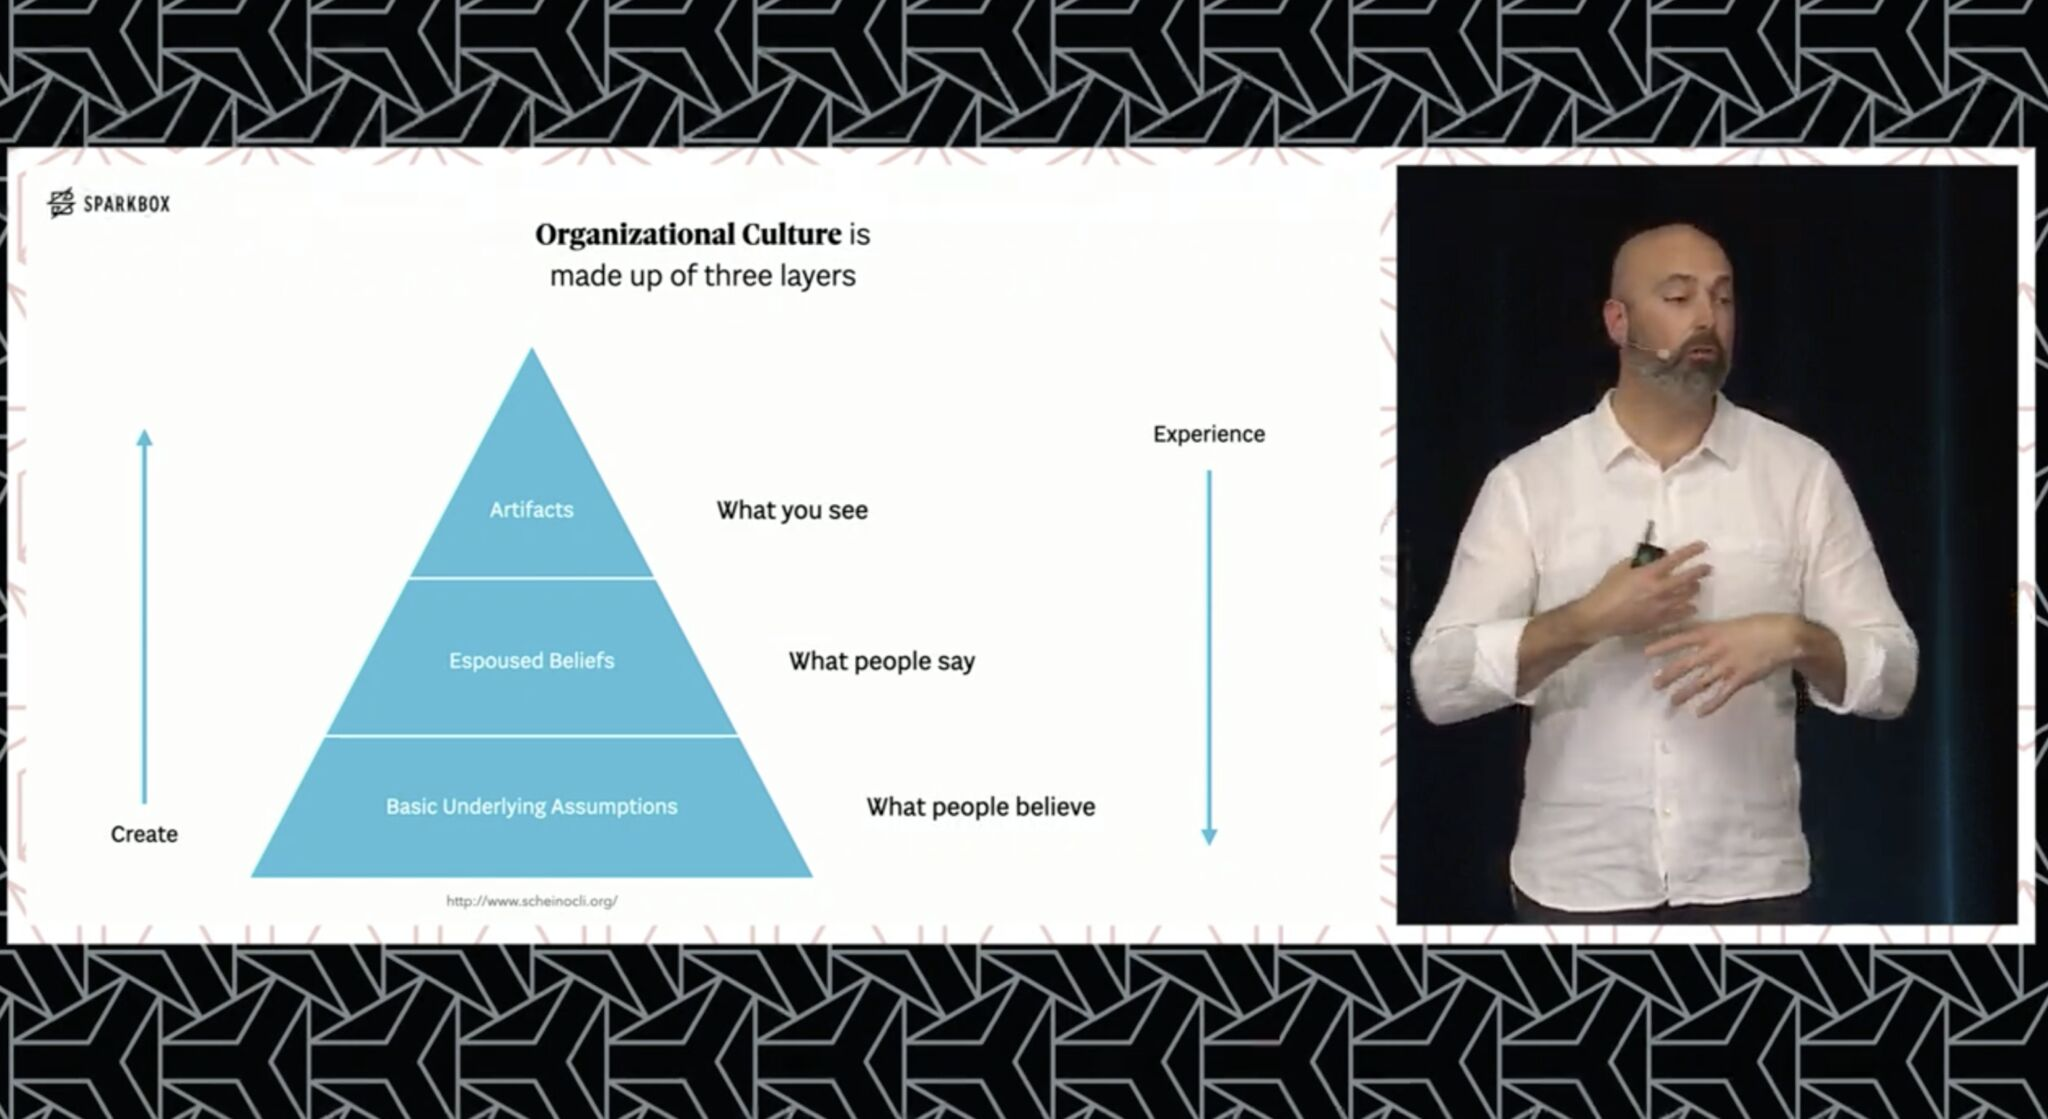 Ben Callahan - Organizational Culutre is made up of three layers: What you see, what people say, what people believe